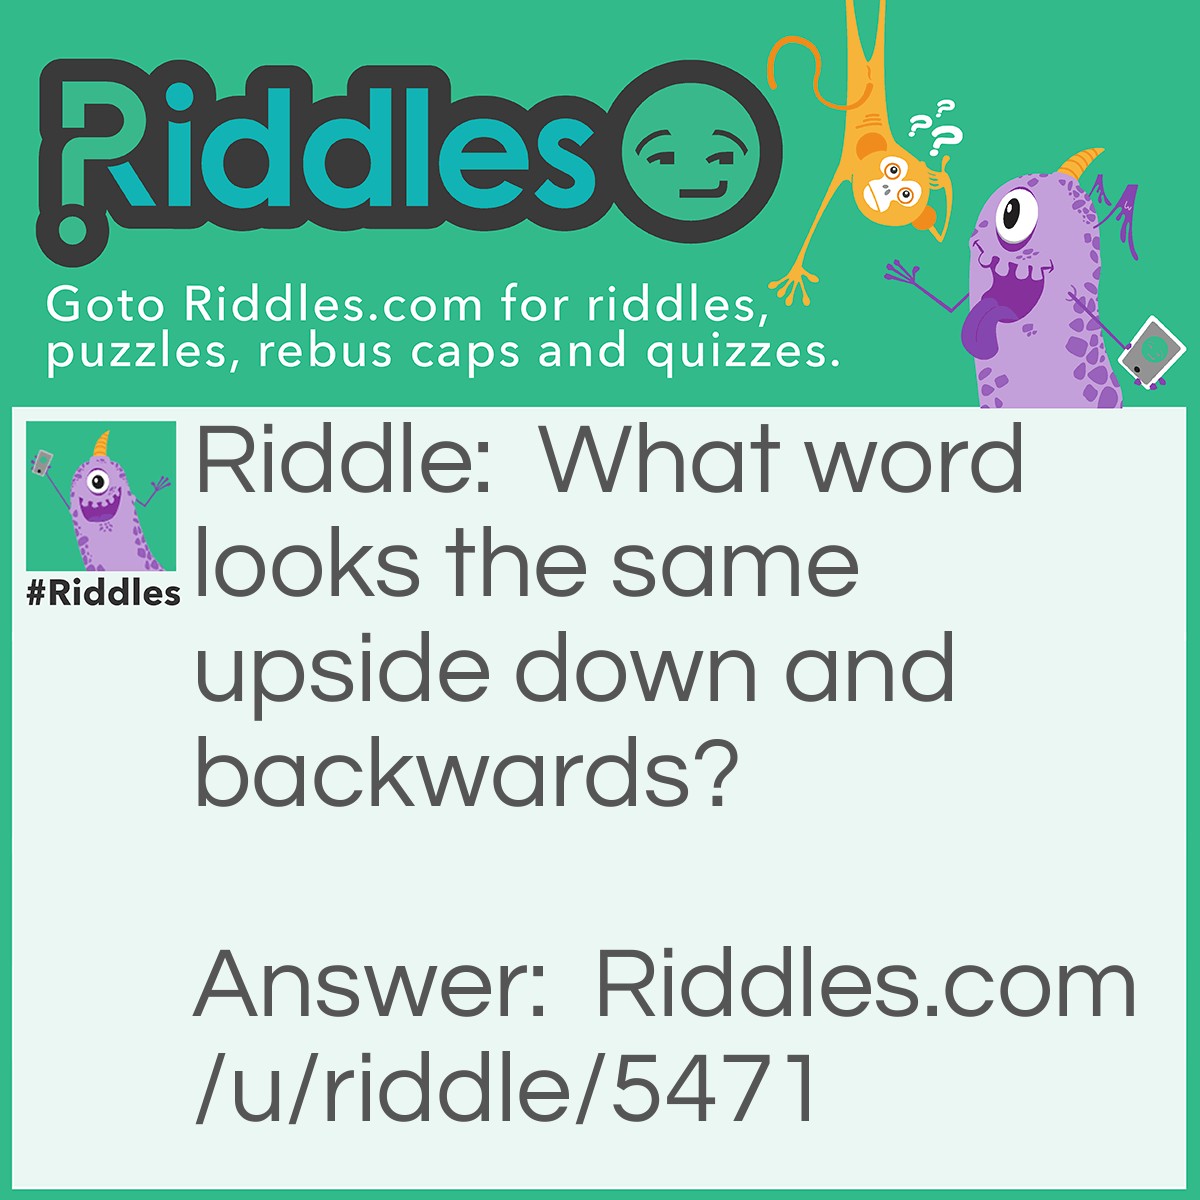 Riddle: What word looks the same upside down and backwards? Answer: SWIMS.